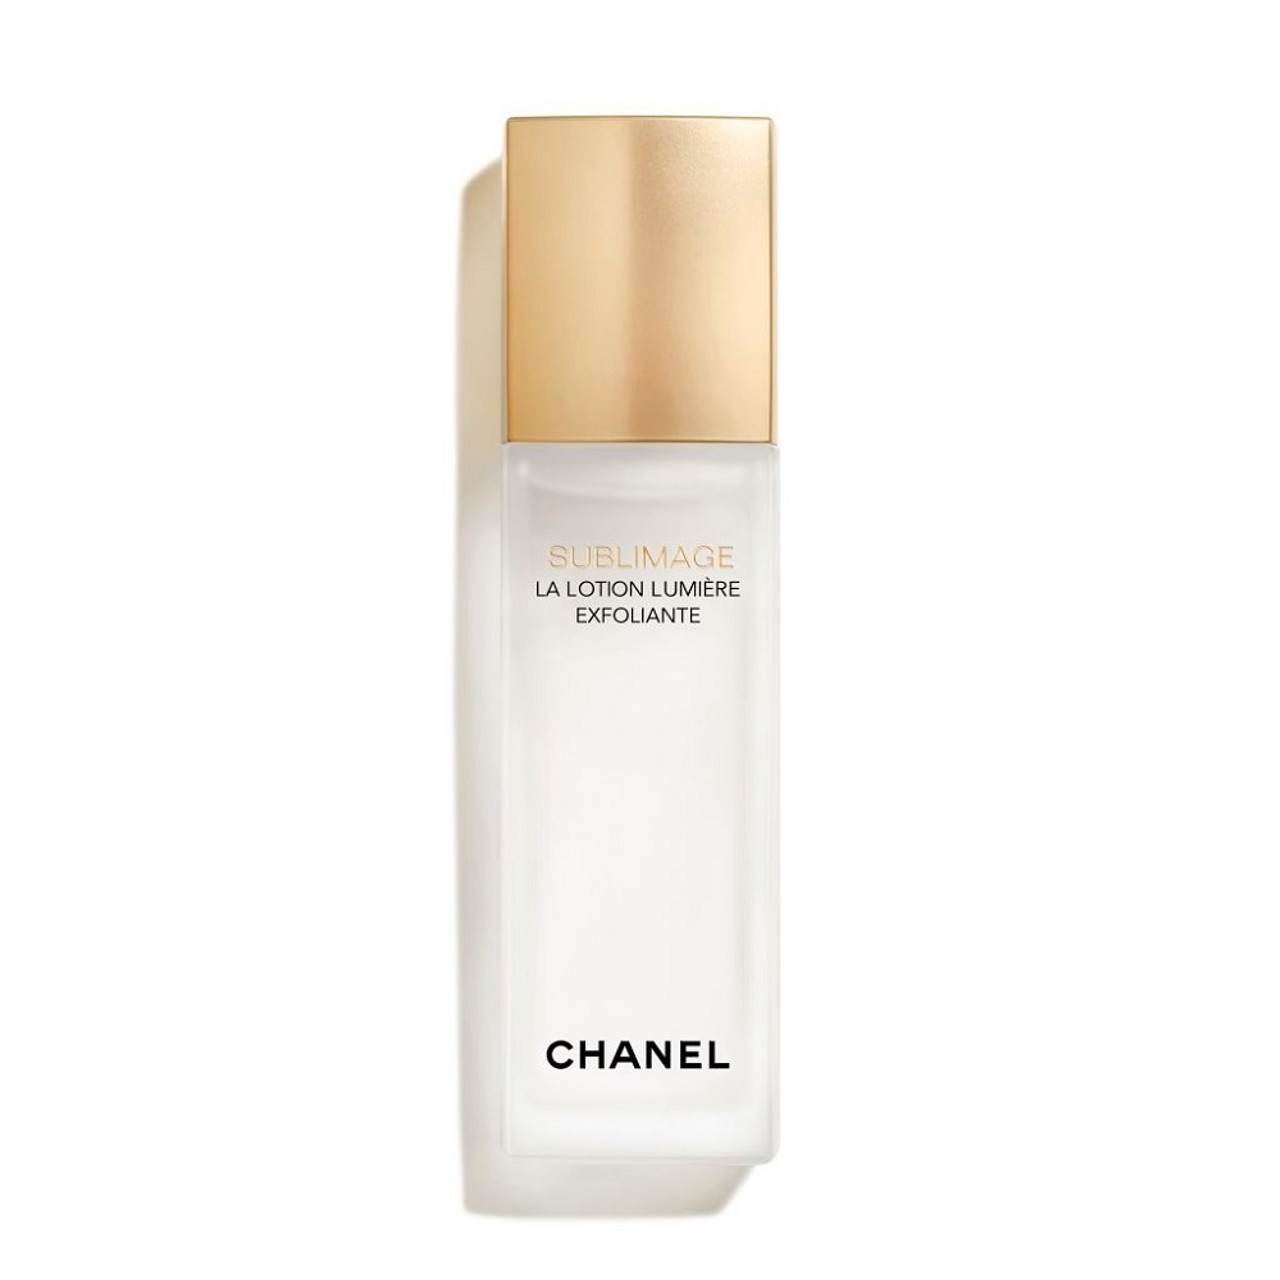 CHANEL Cream Foundation for sale, Shop with Afterpay